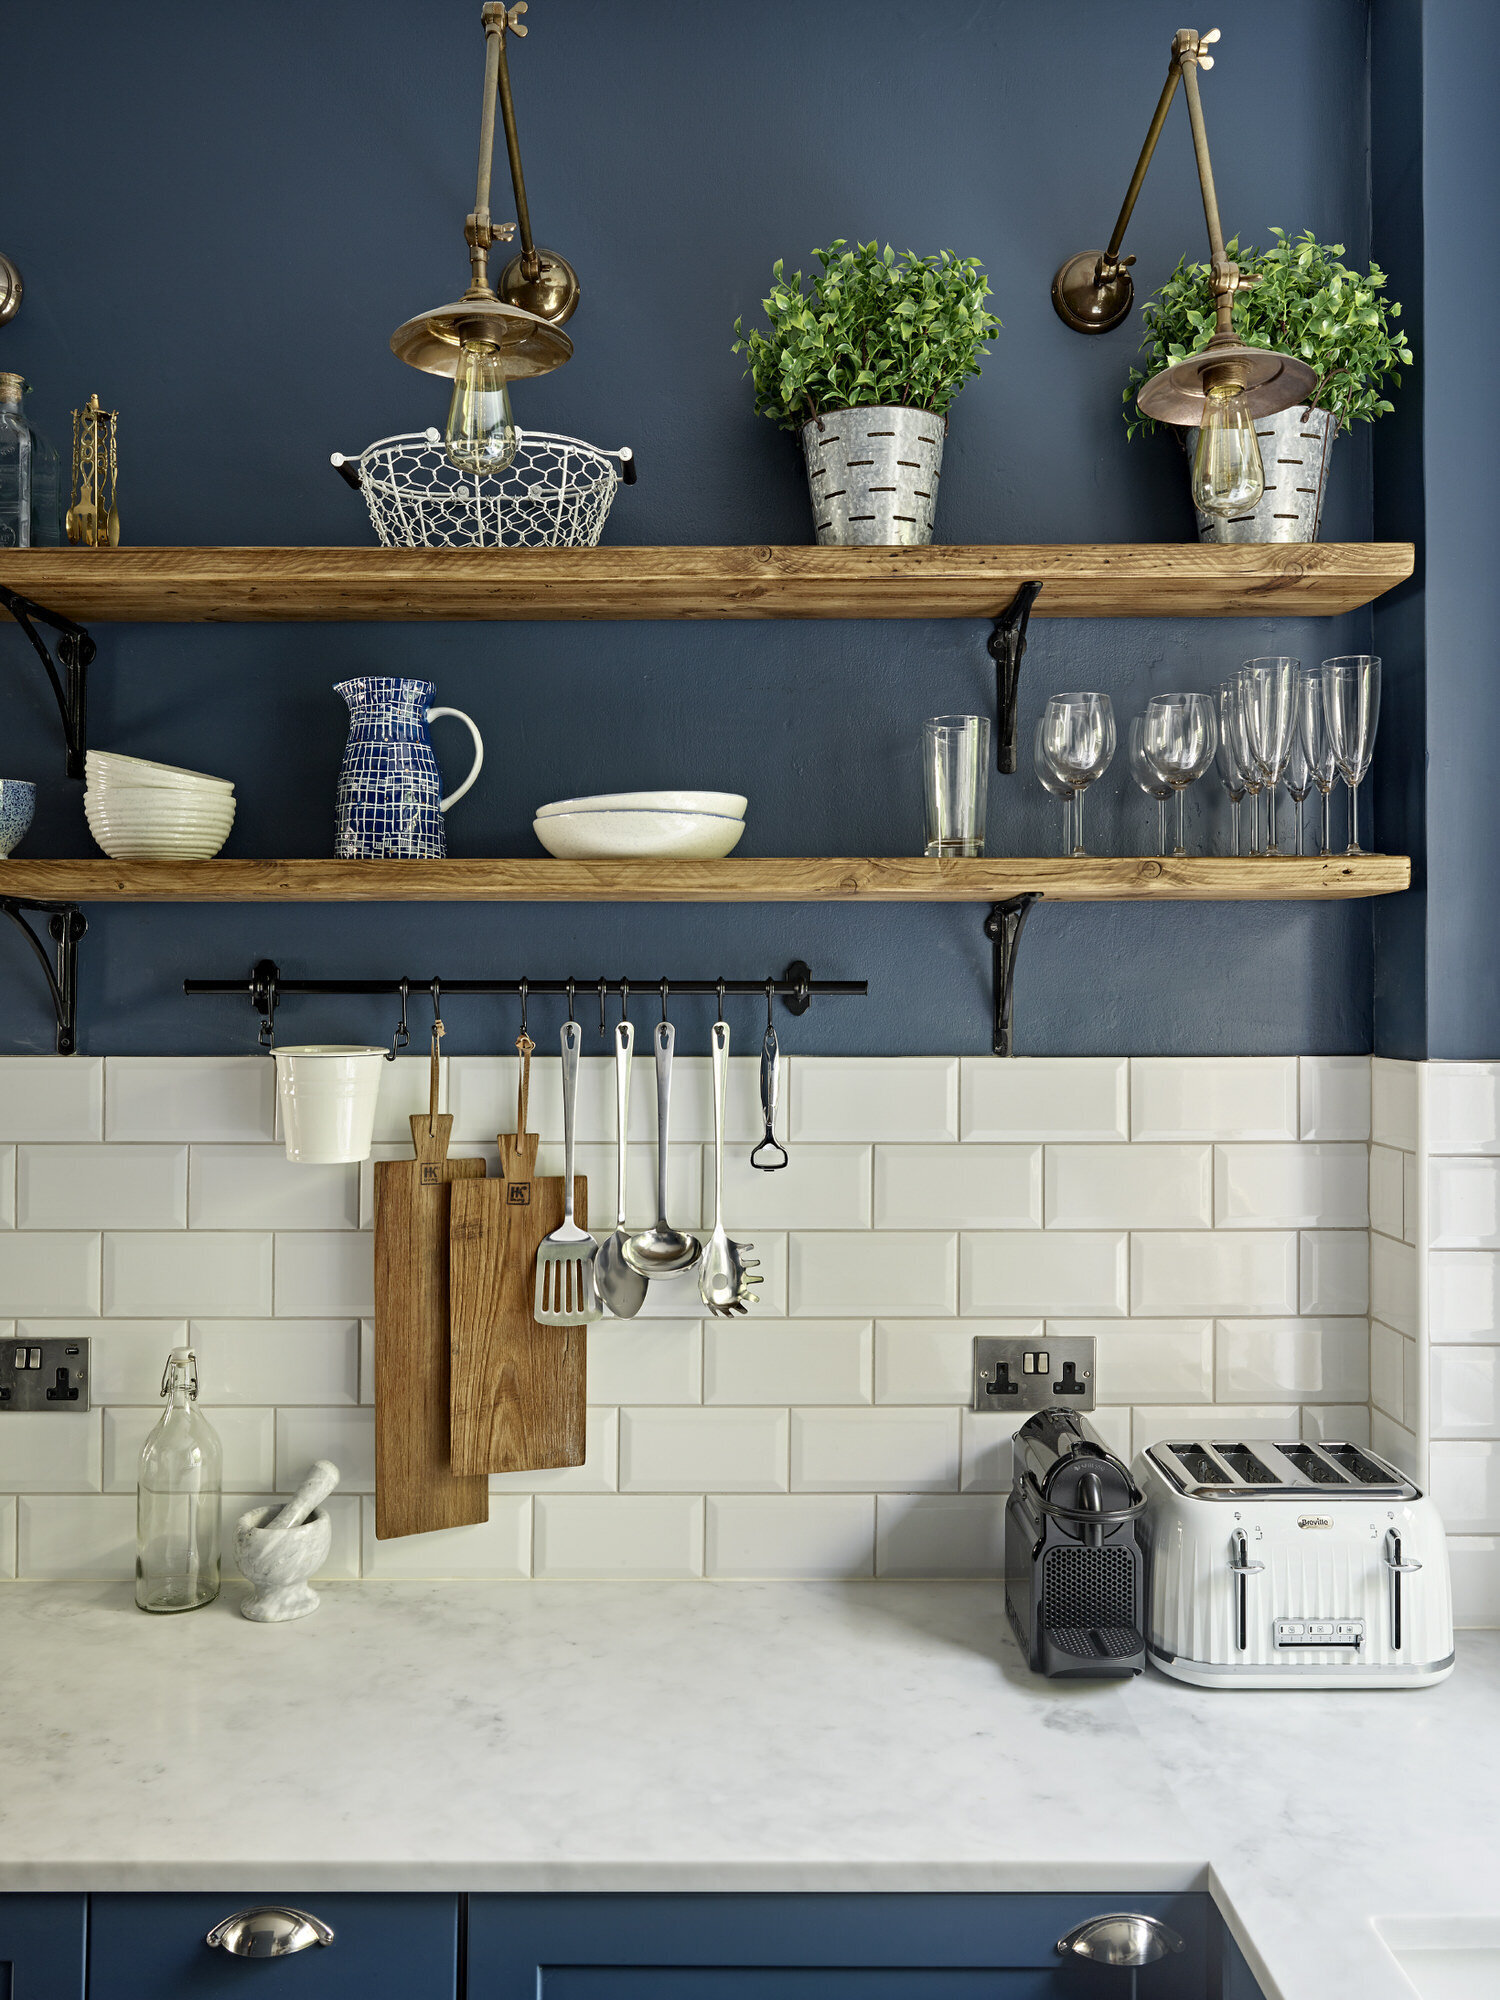 Navy kitchen wall with wooden open shelving concept